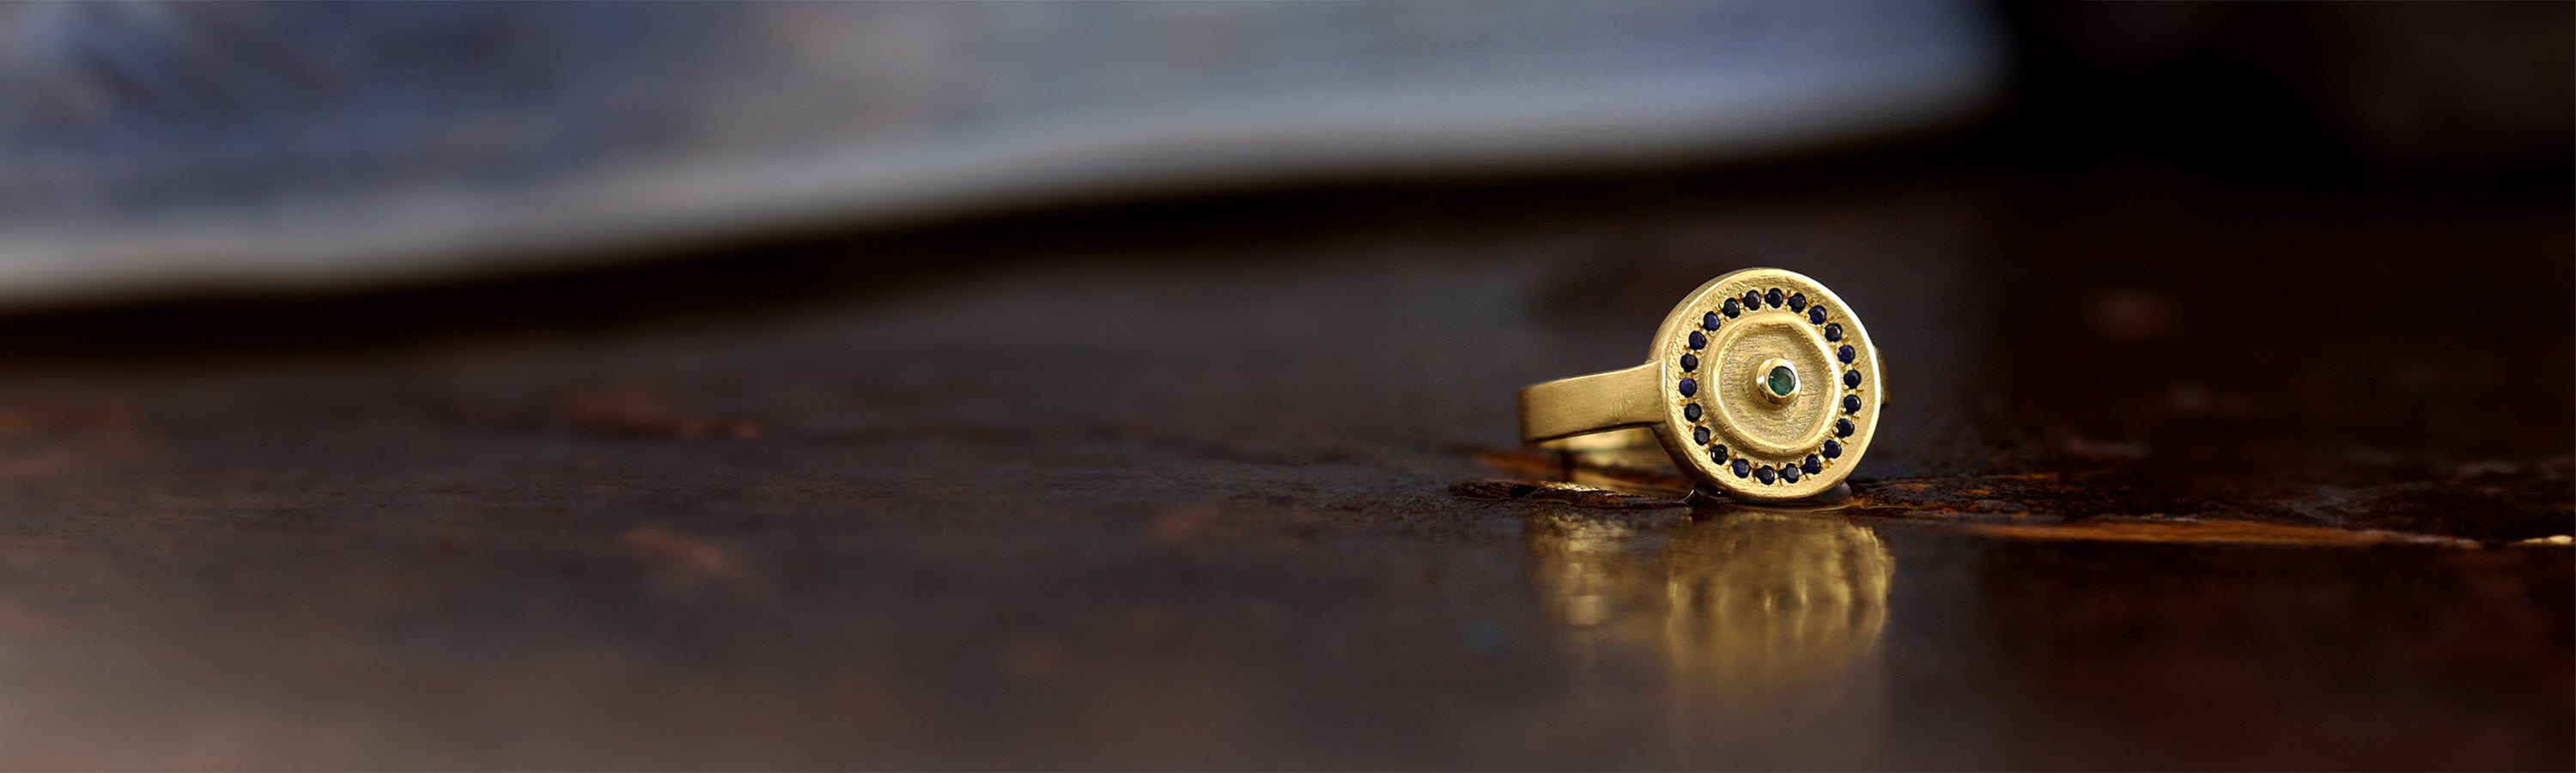 Yellow gold seal ring lying on a rustic surface with a dreamy background